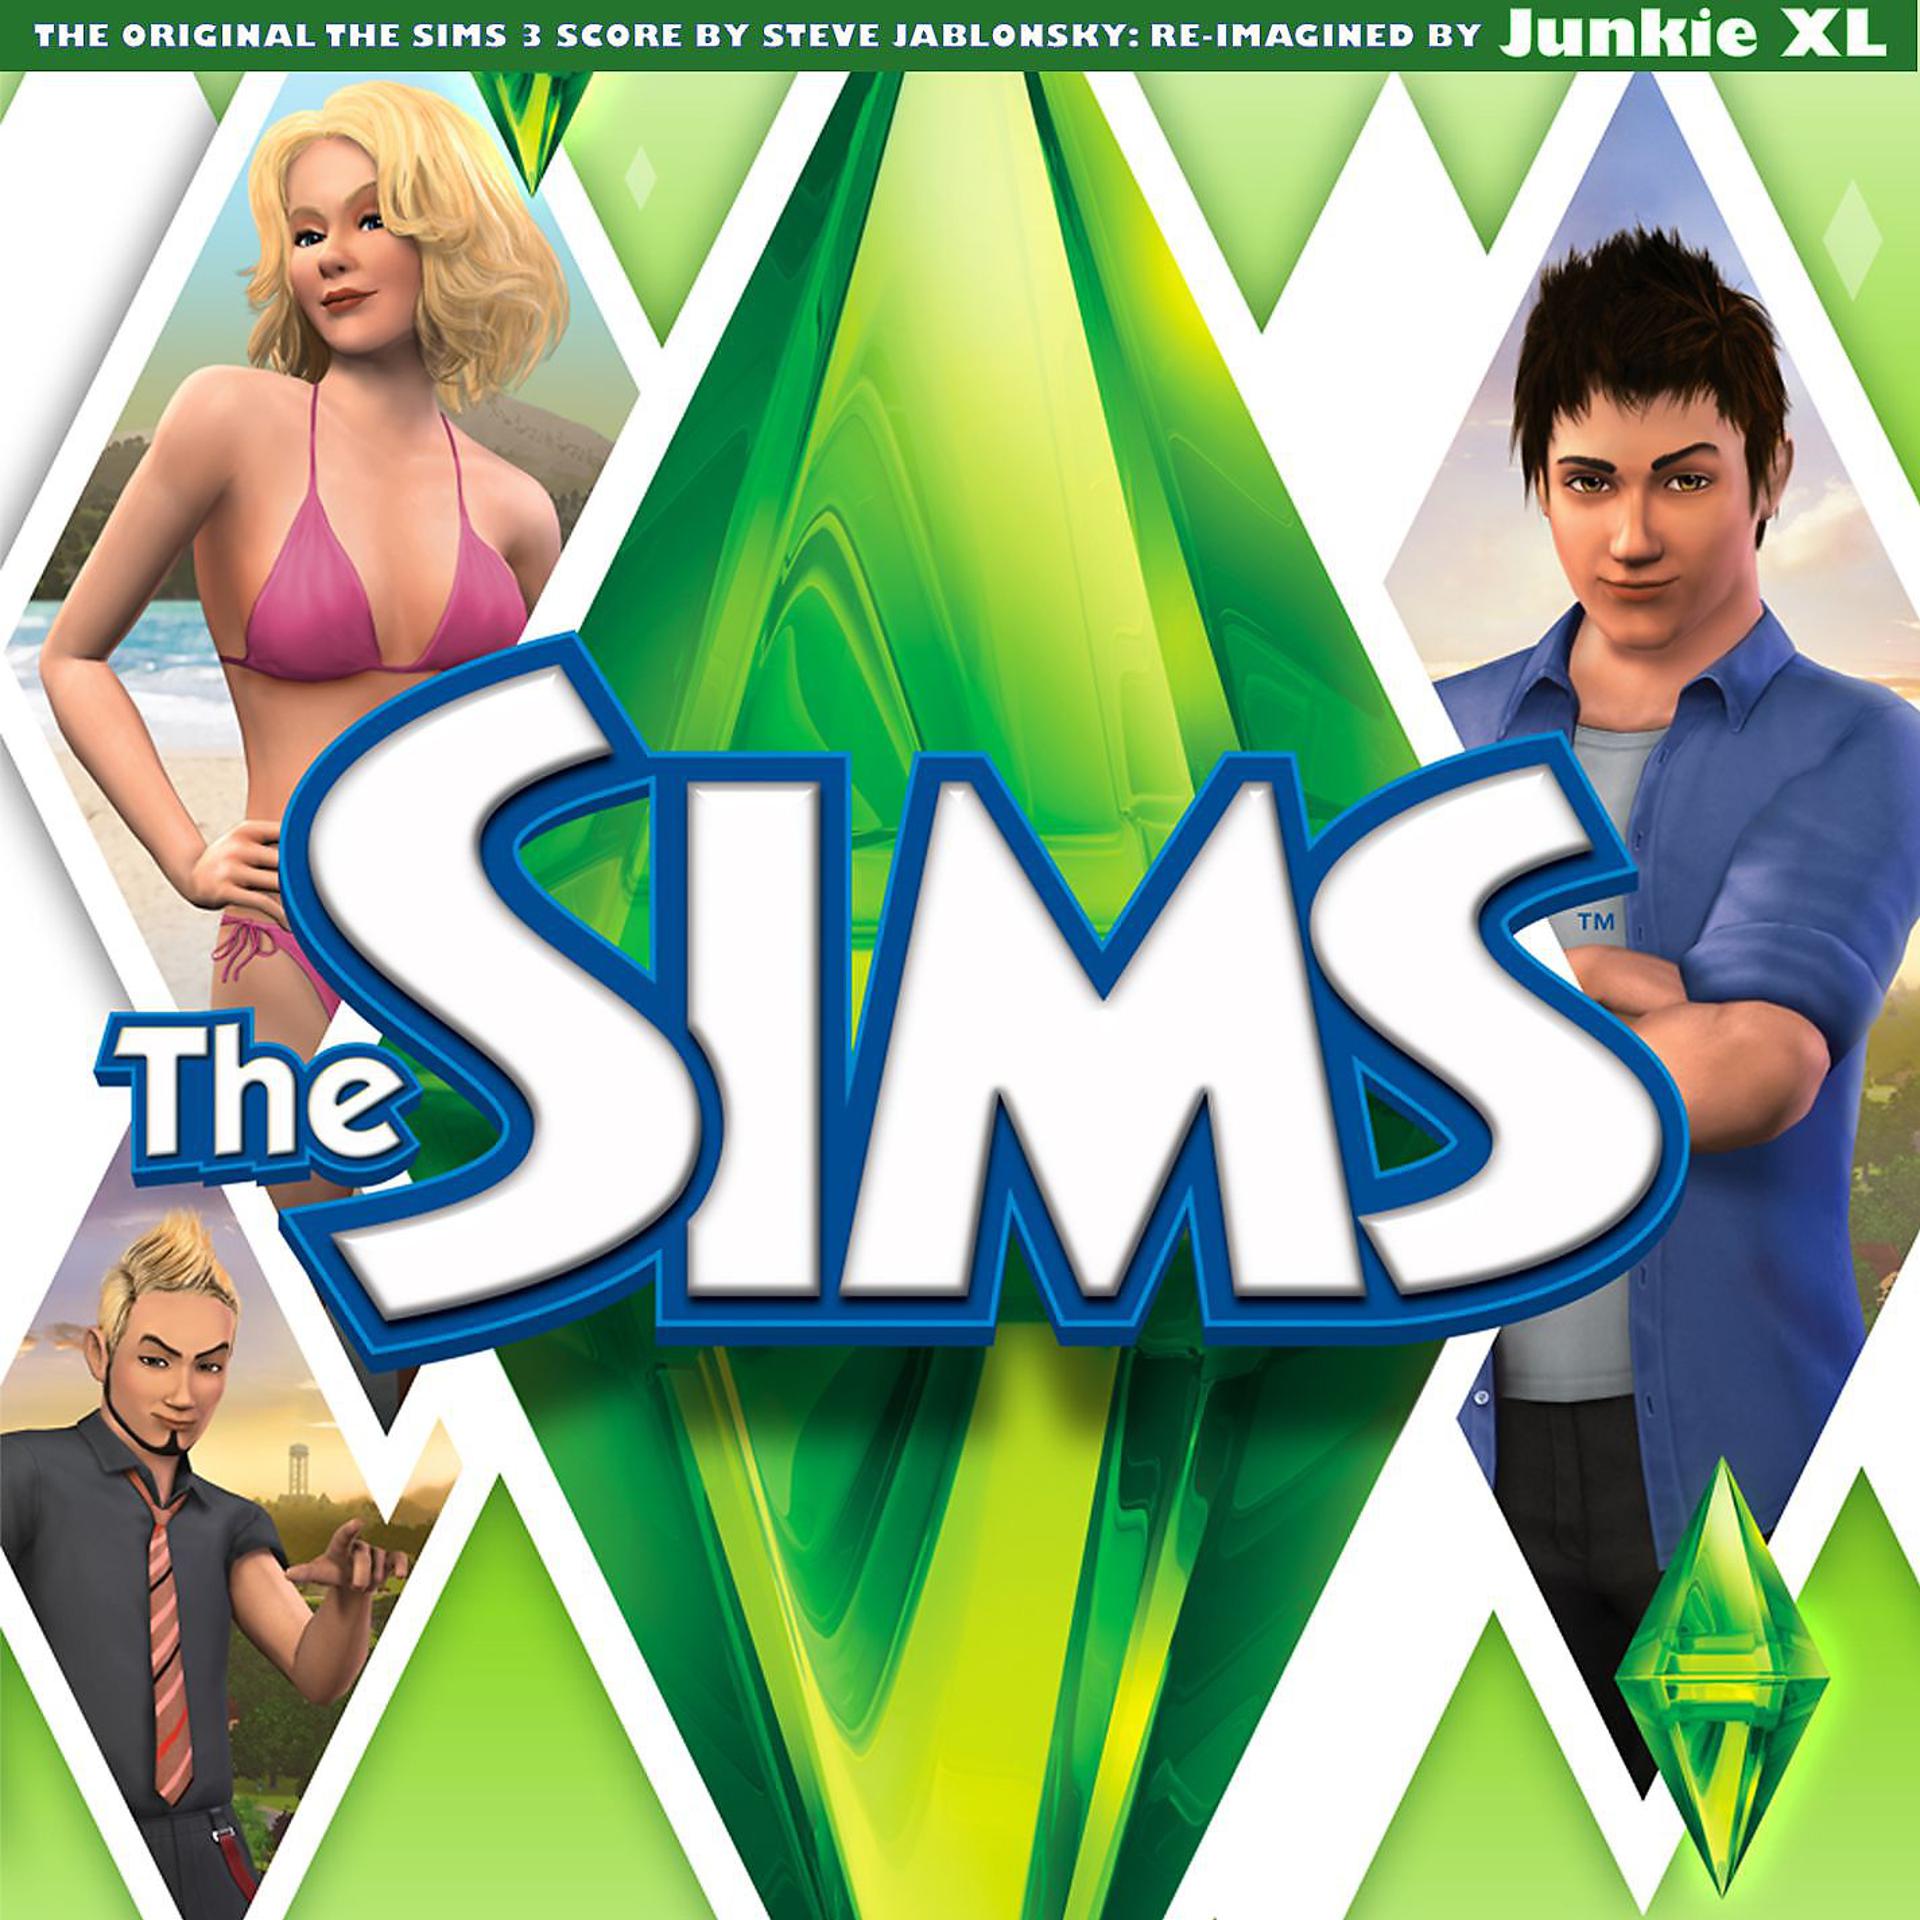 Постер альбома The Sims 3 Re-Imagined - Junkie XL